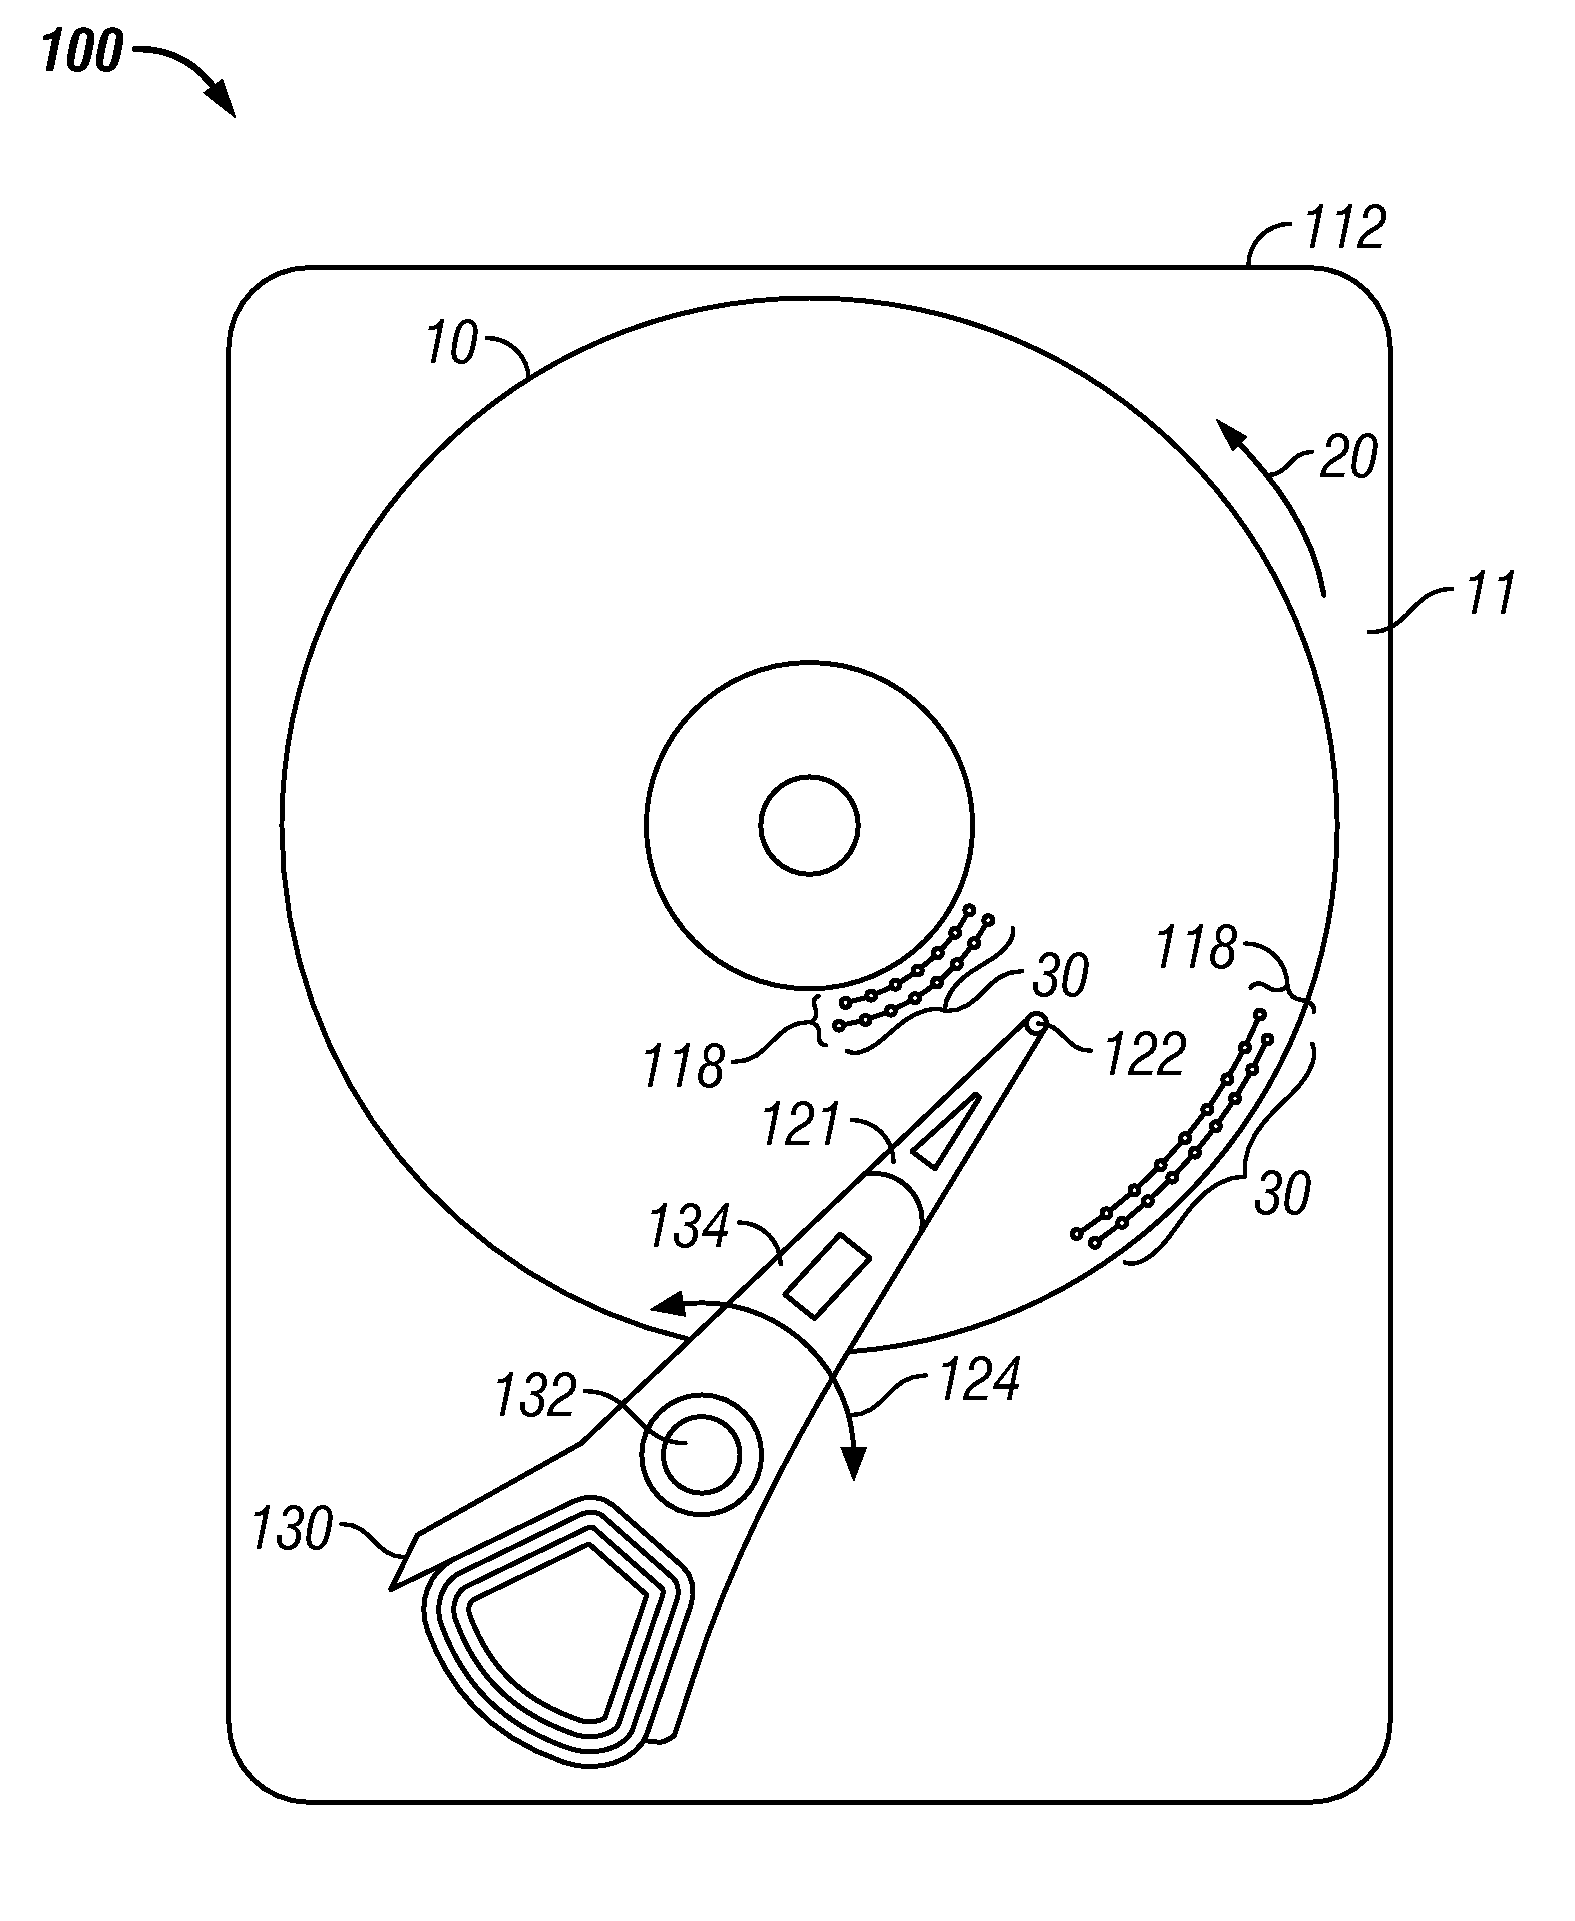 Patterned magnetic recording medium with data island pattern for improved reading and writing and magnetic recording system incorporating the medium